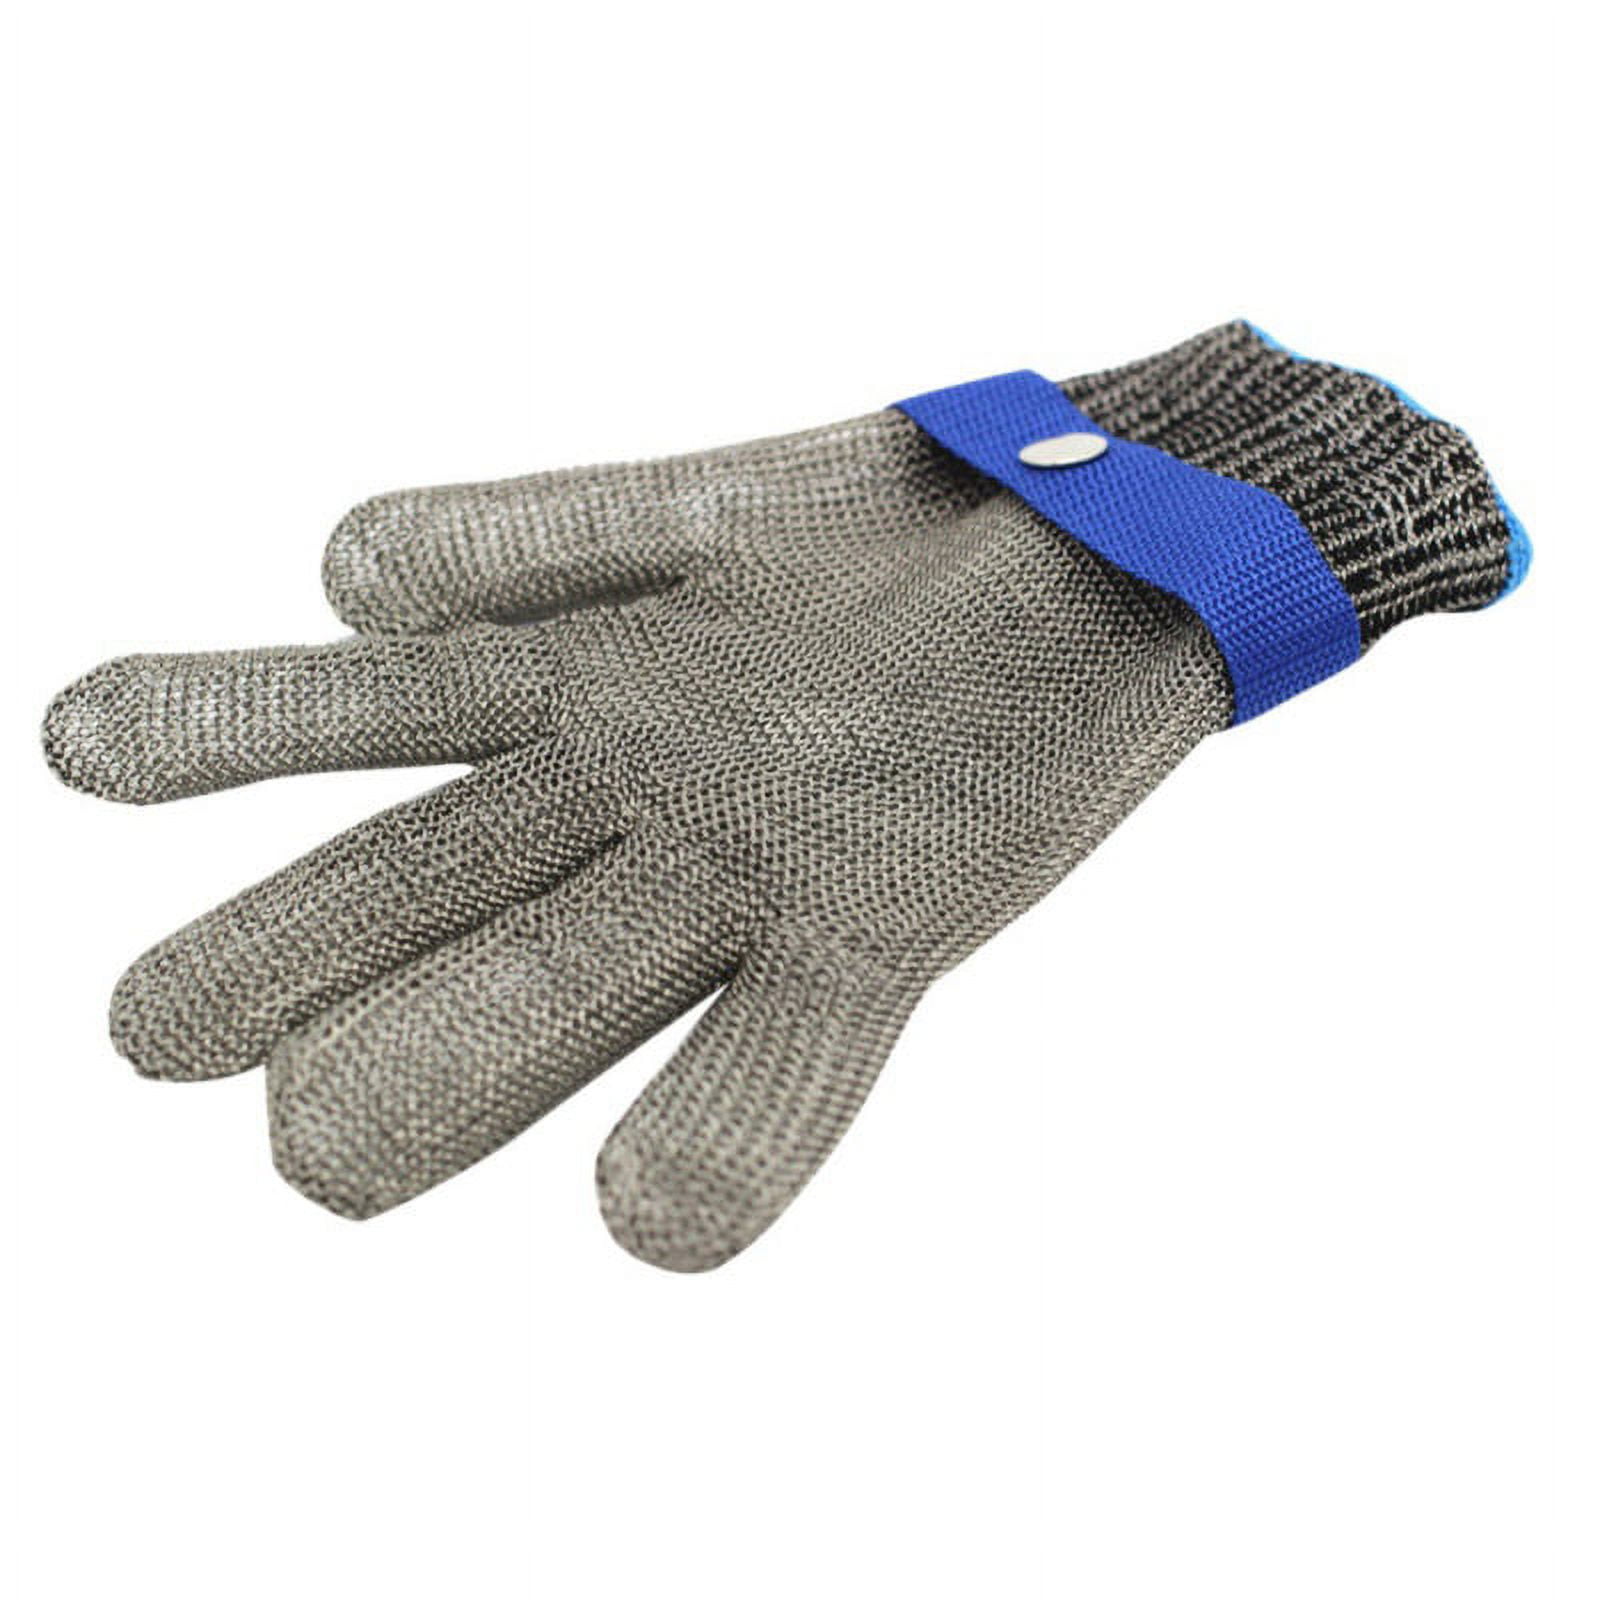 Generic Hand Working Gloves Safety Grip Protection Work Gloves Men Women  BBQ Thicker Industry Knitted Cut Repair Gloves Durable String